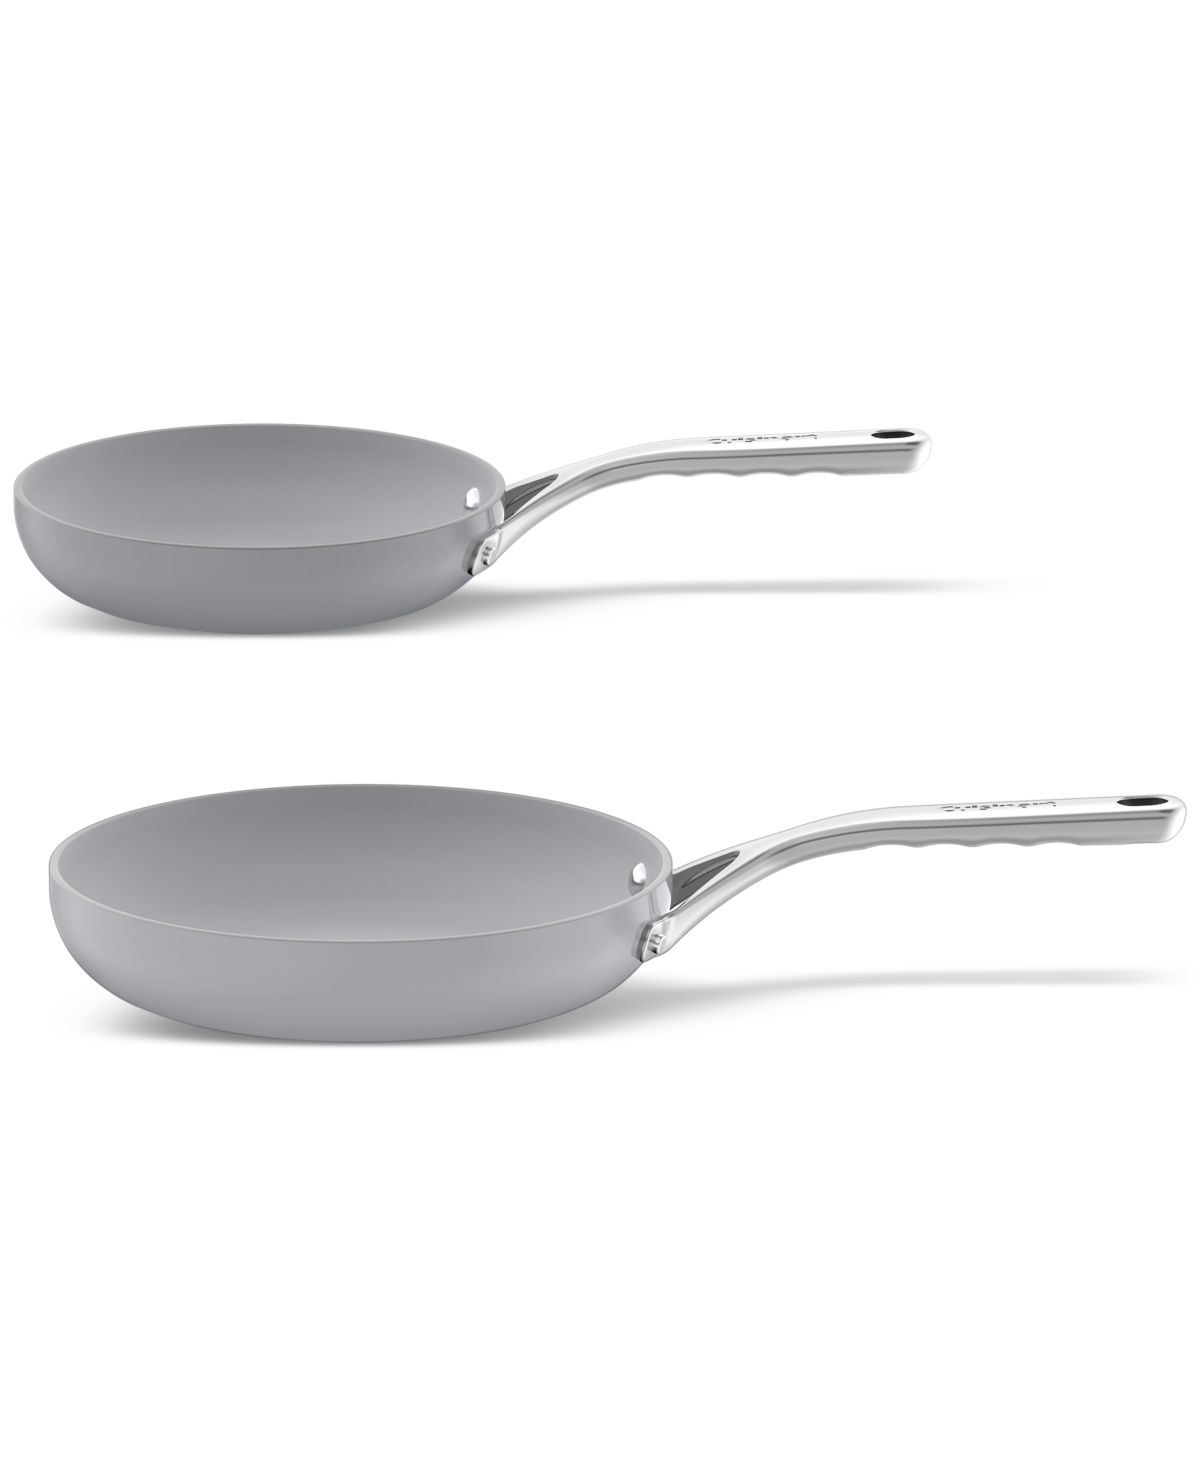 Cuisinart Culinary Collection 2-pc. Ceramic Nonstick Skillet Set In Gray